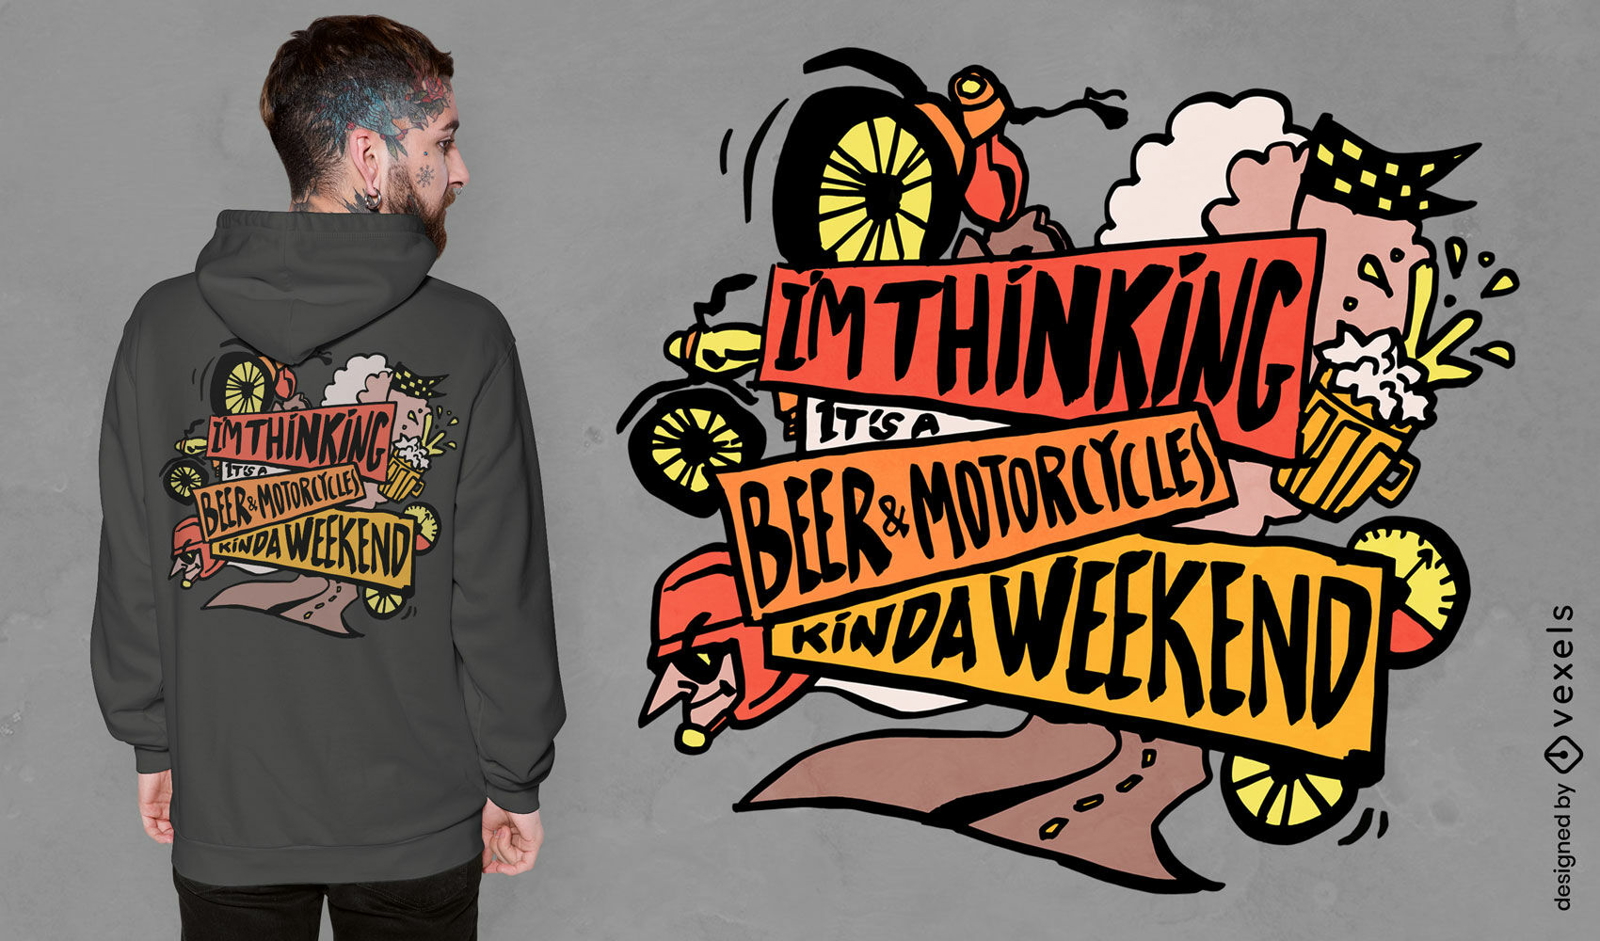 Beer and motorcycle funny quote t-shirt design